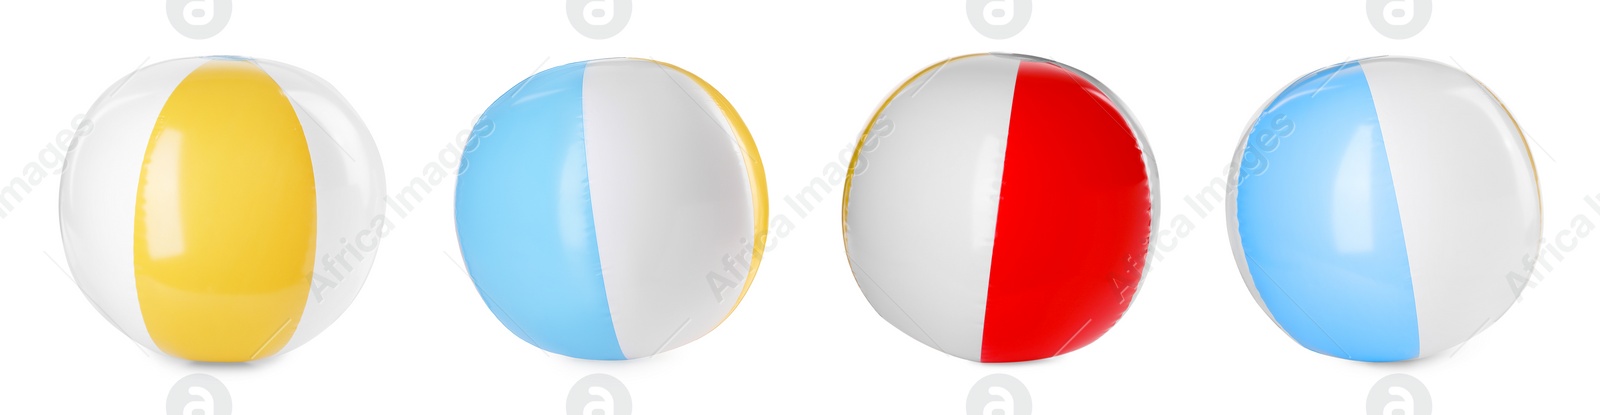 Image of Beach ball isolated on white, different sides